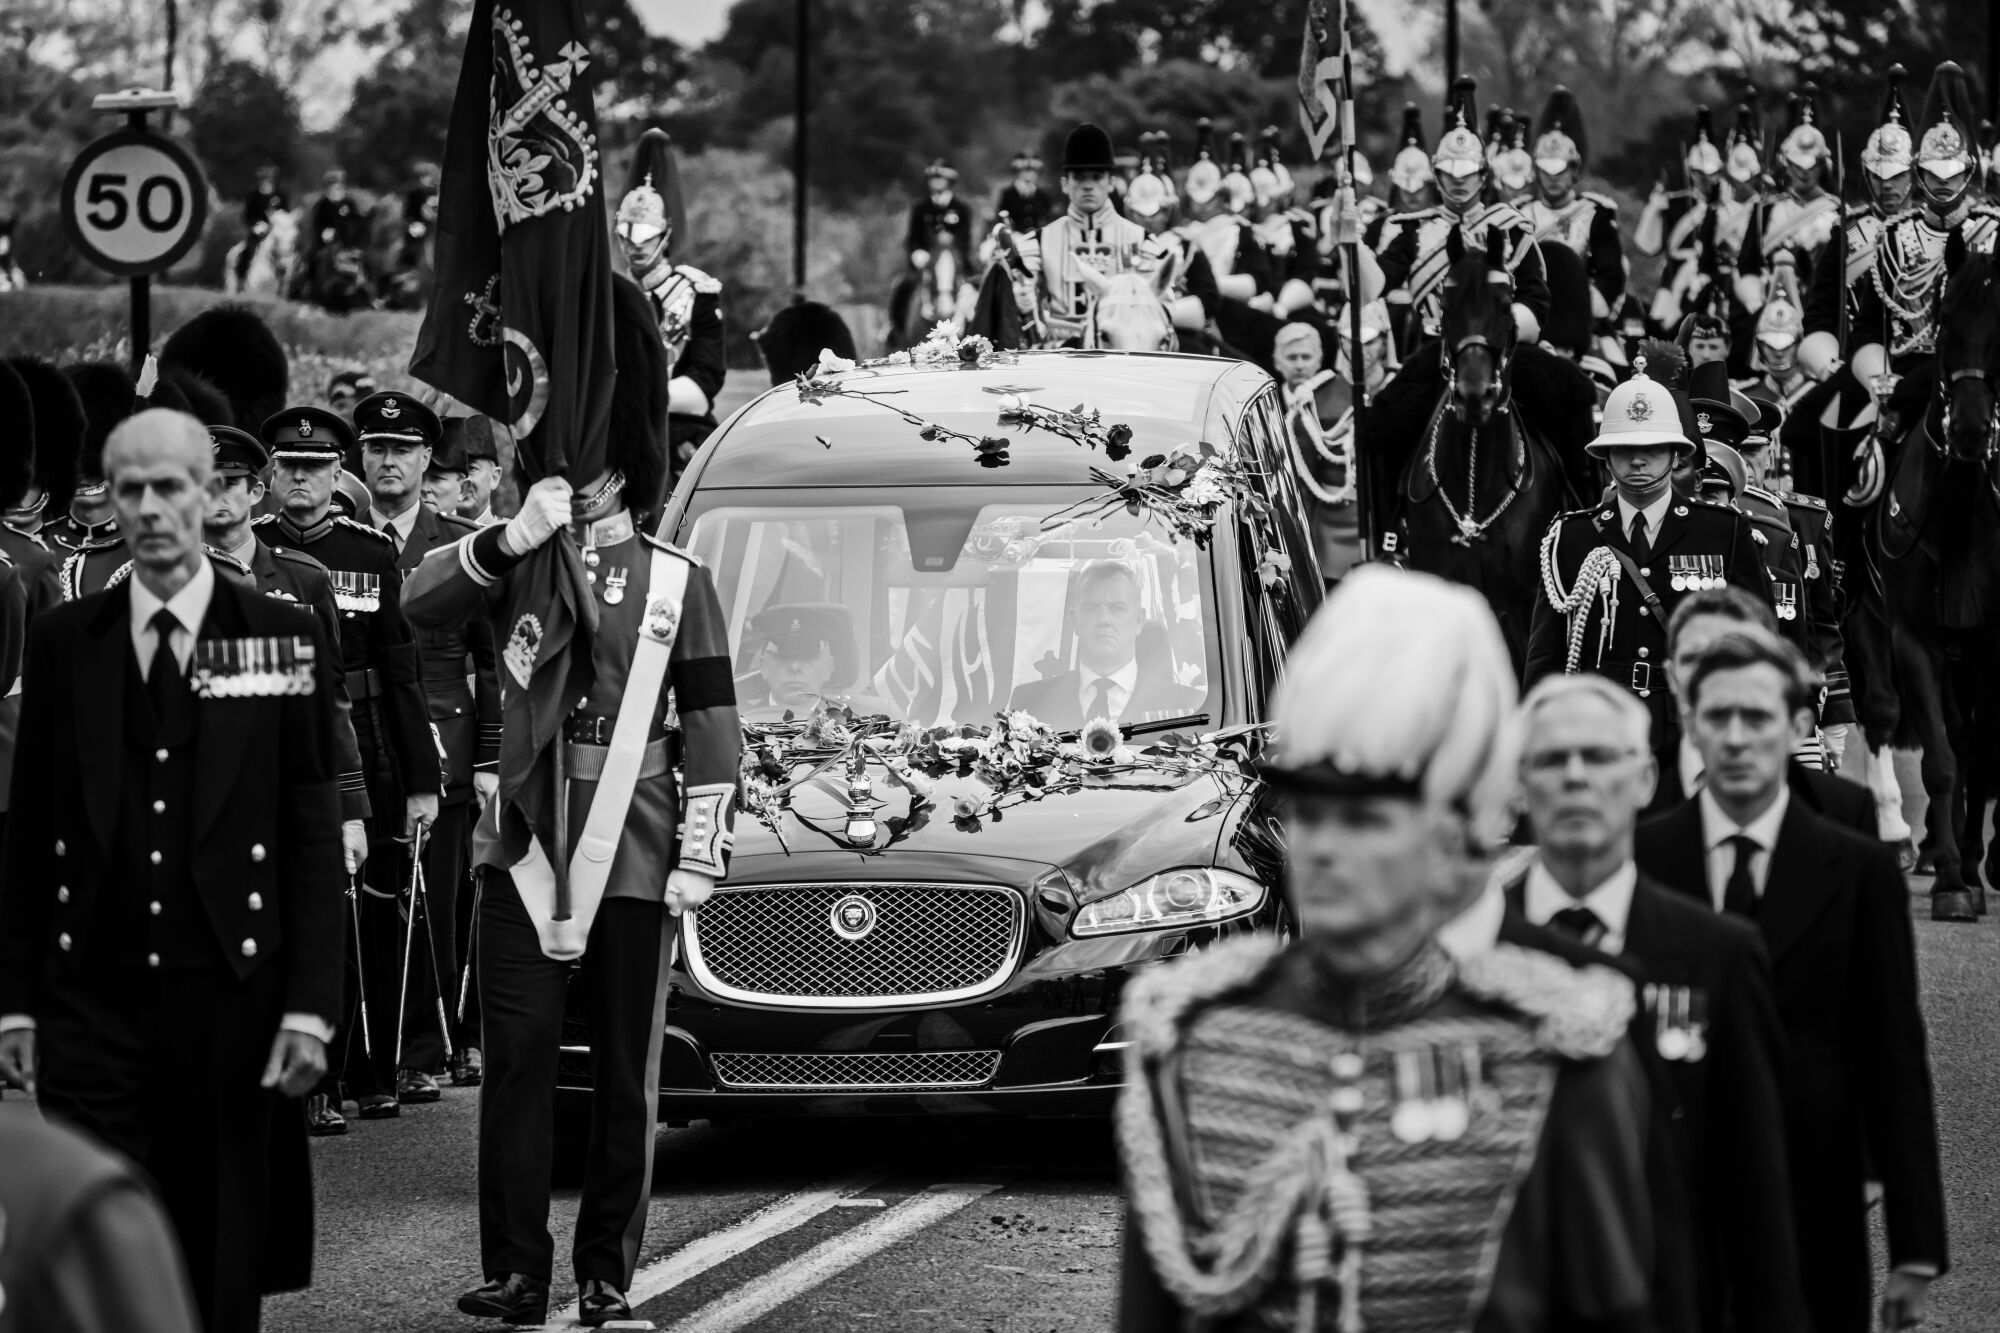 A hearse bearing the coffin of Queen Elizabeth II slowly makes its way towards the road leading to Windsor Castle.